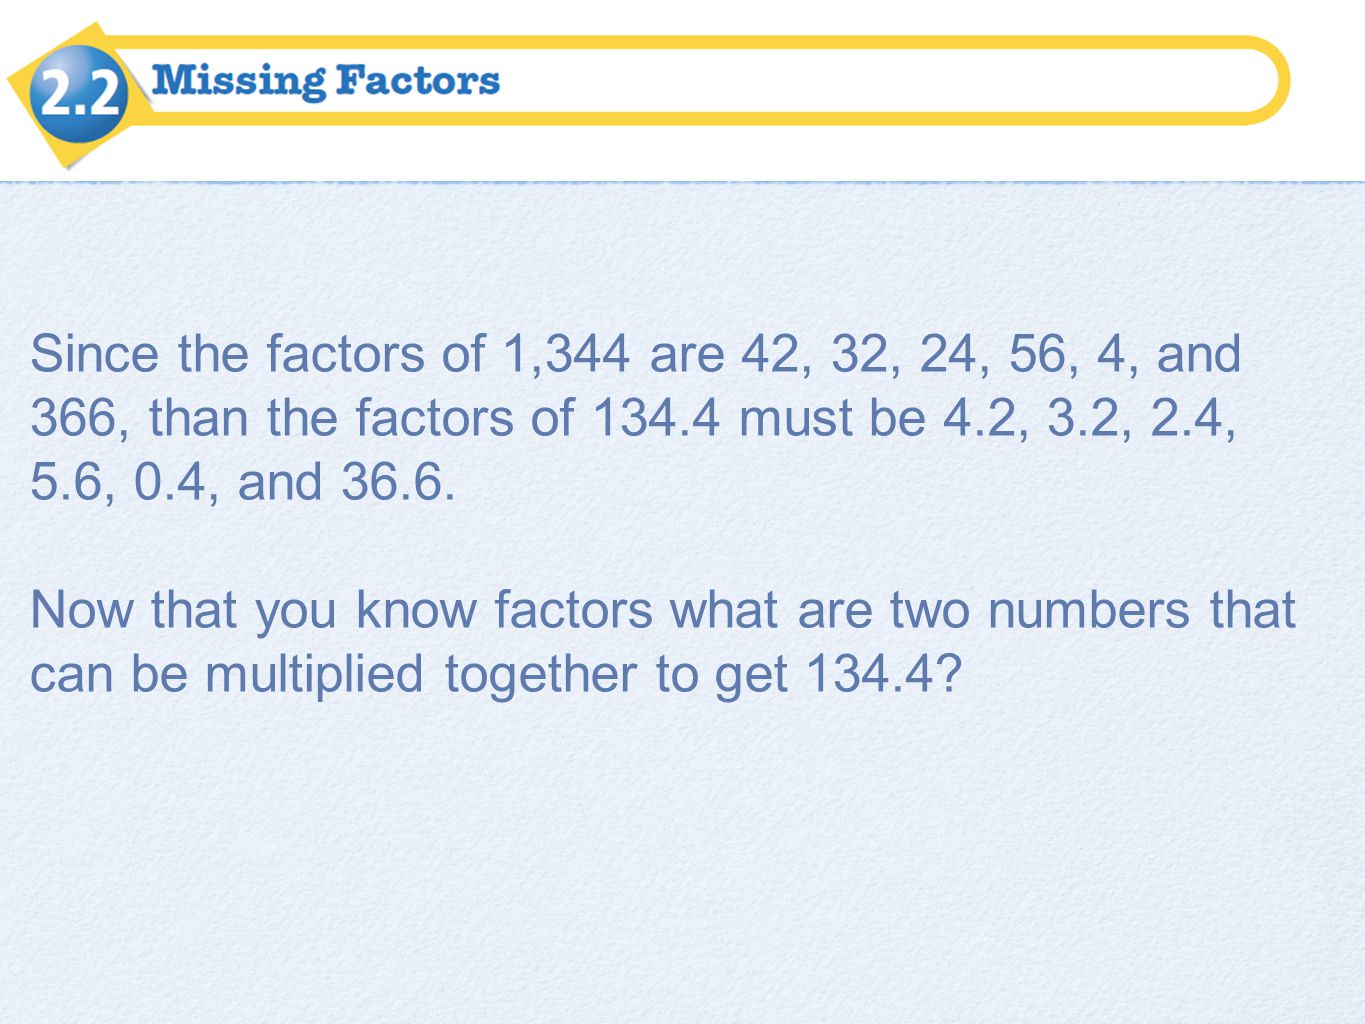 Since the factors of 1,344 are 42, 32, 24, 56, 4, and 366, than the factors of must be 4.2, 3.2, 2.4, 5.6, 0.4, and 36.6.